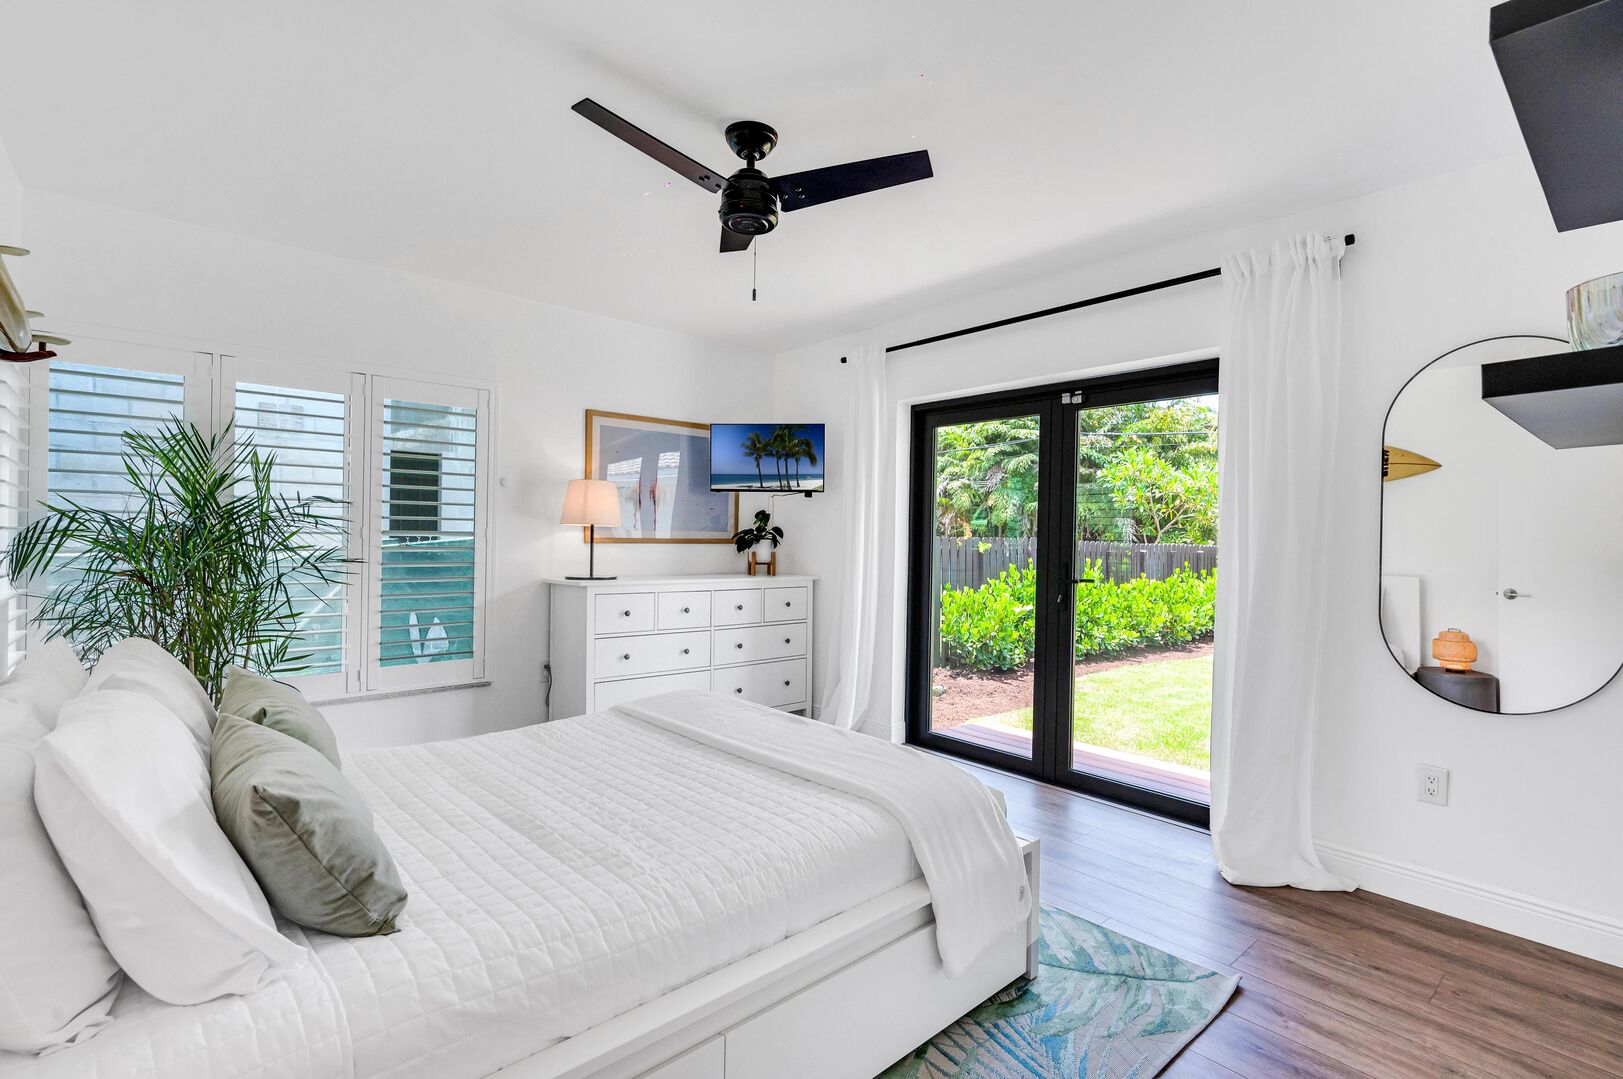 Unwind in Our Guest Bedroom, Offering a Queen-Size Bed, Smart TV, and Direct Doors Leading to the Pool. Your Perfect Blend of Comfort and Outdoor Delight.